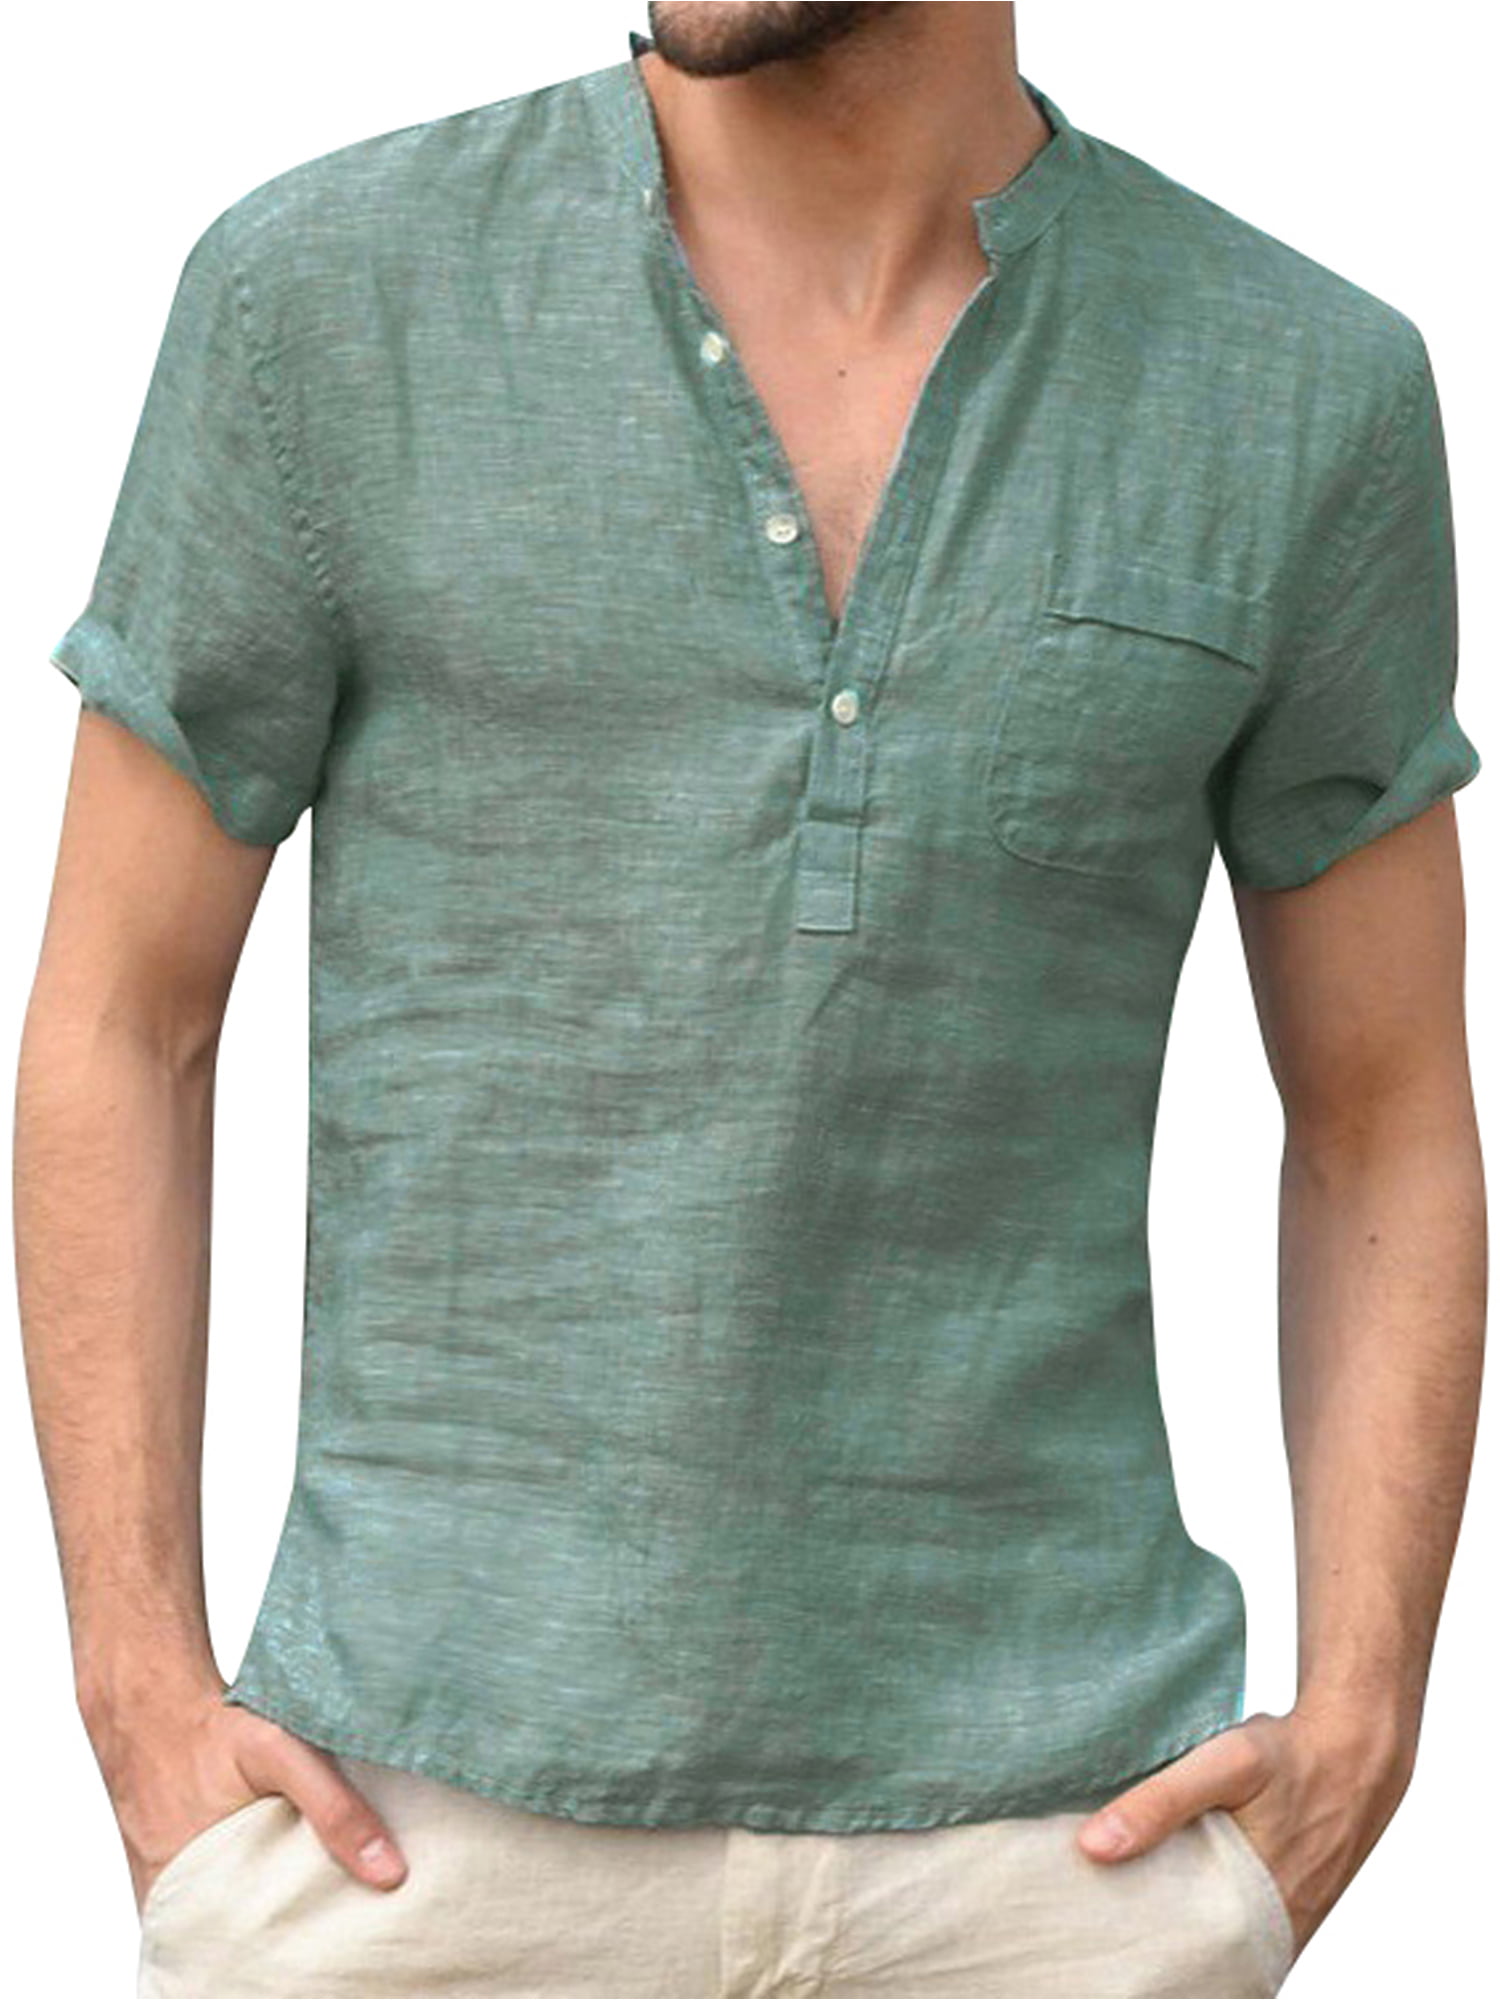 Men Cotton Linen Shirts 3//4 Sleeve 2019 New Casual Collar V Neck Solid Yoga Top Blouse